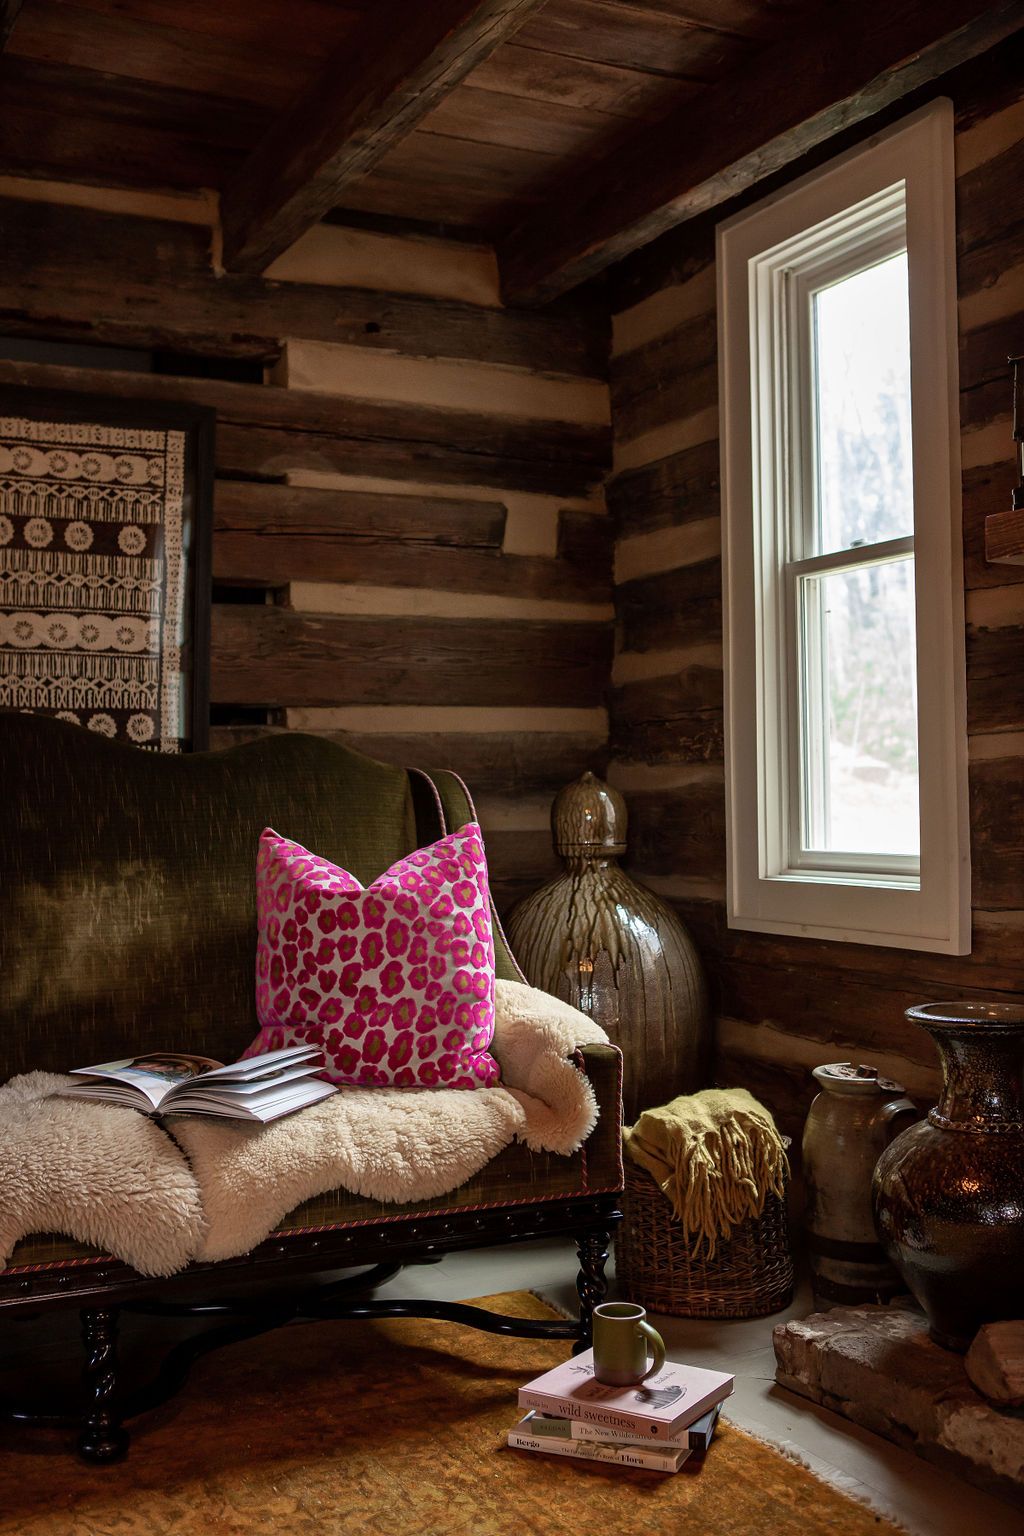 Quiet interior at home with pillows and books